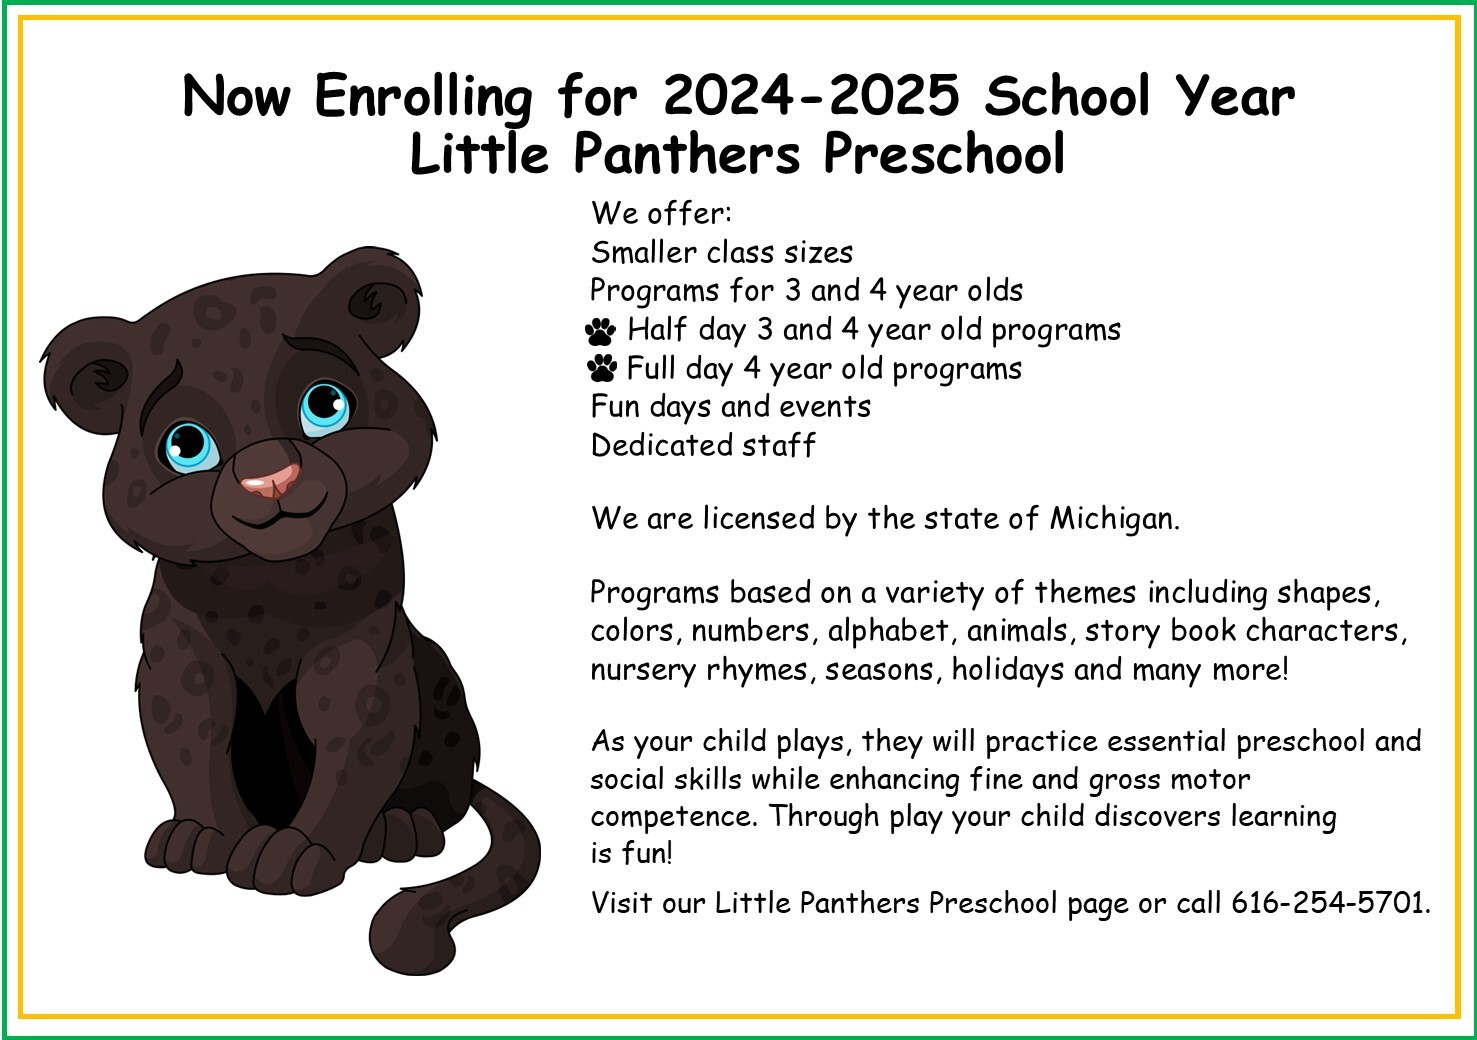 General Little Panthers Preschool information with webpage link and phone number.